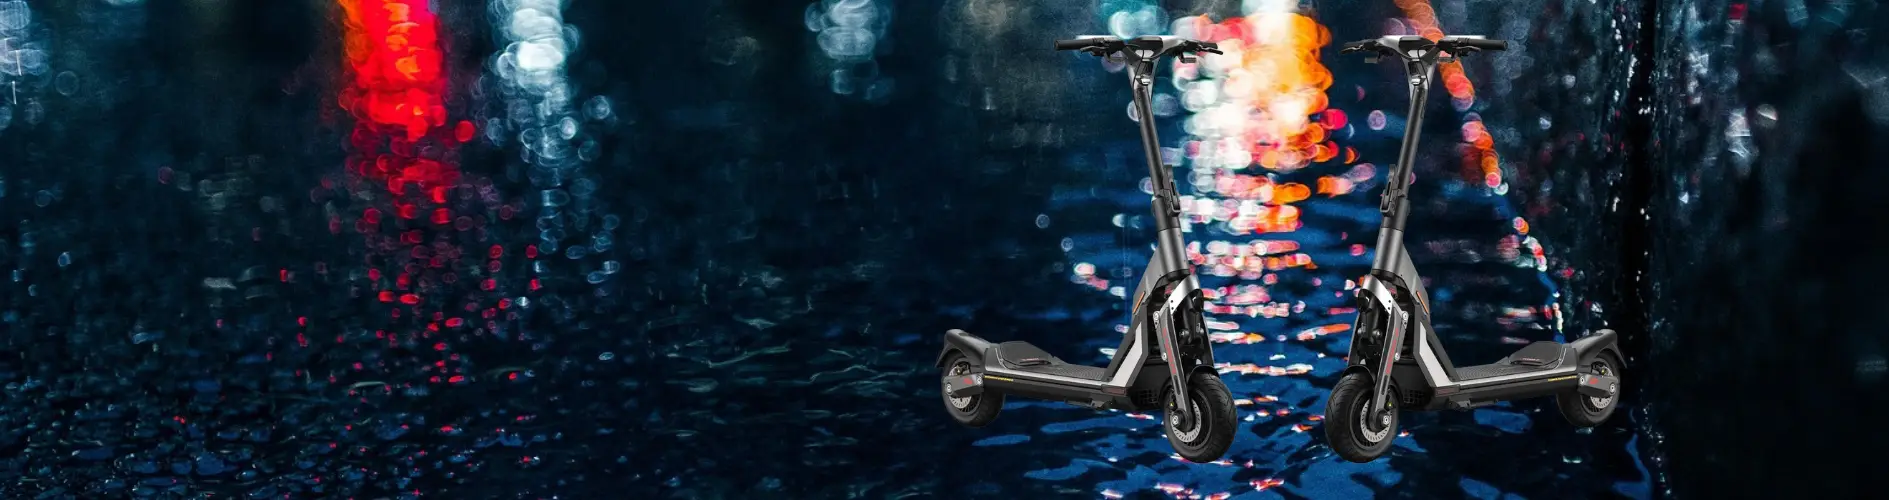 An image that depicts a wet street under the rain with two Segway SuperScooter GT1 electric scooters in the foreground.